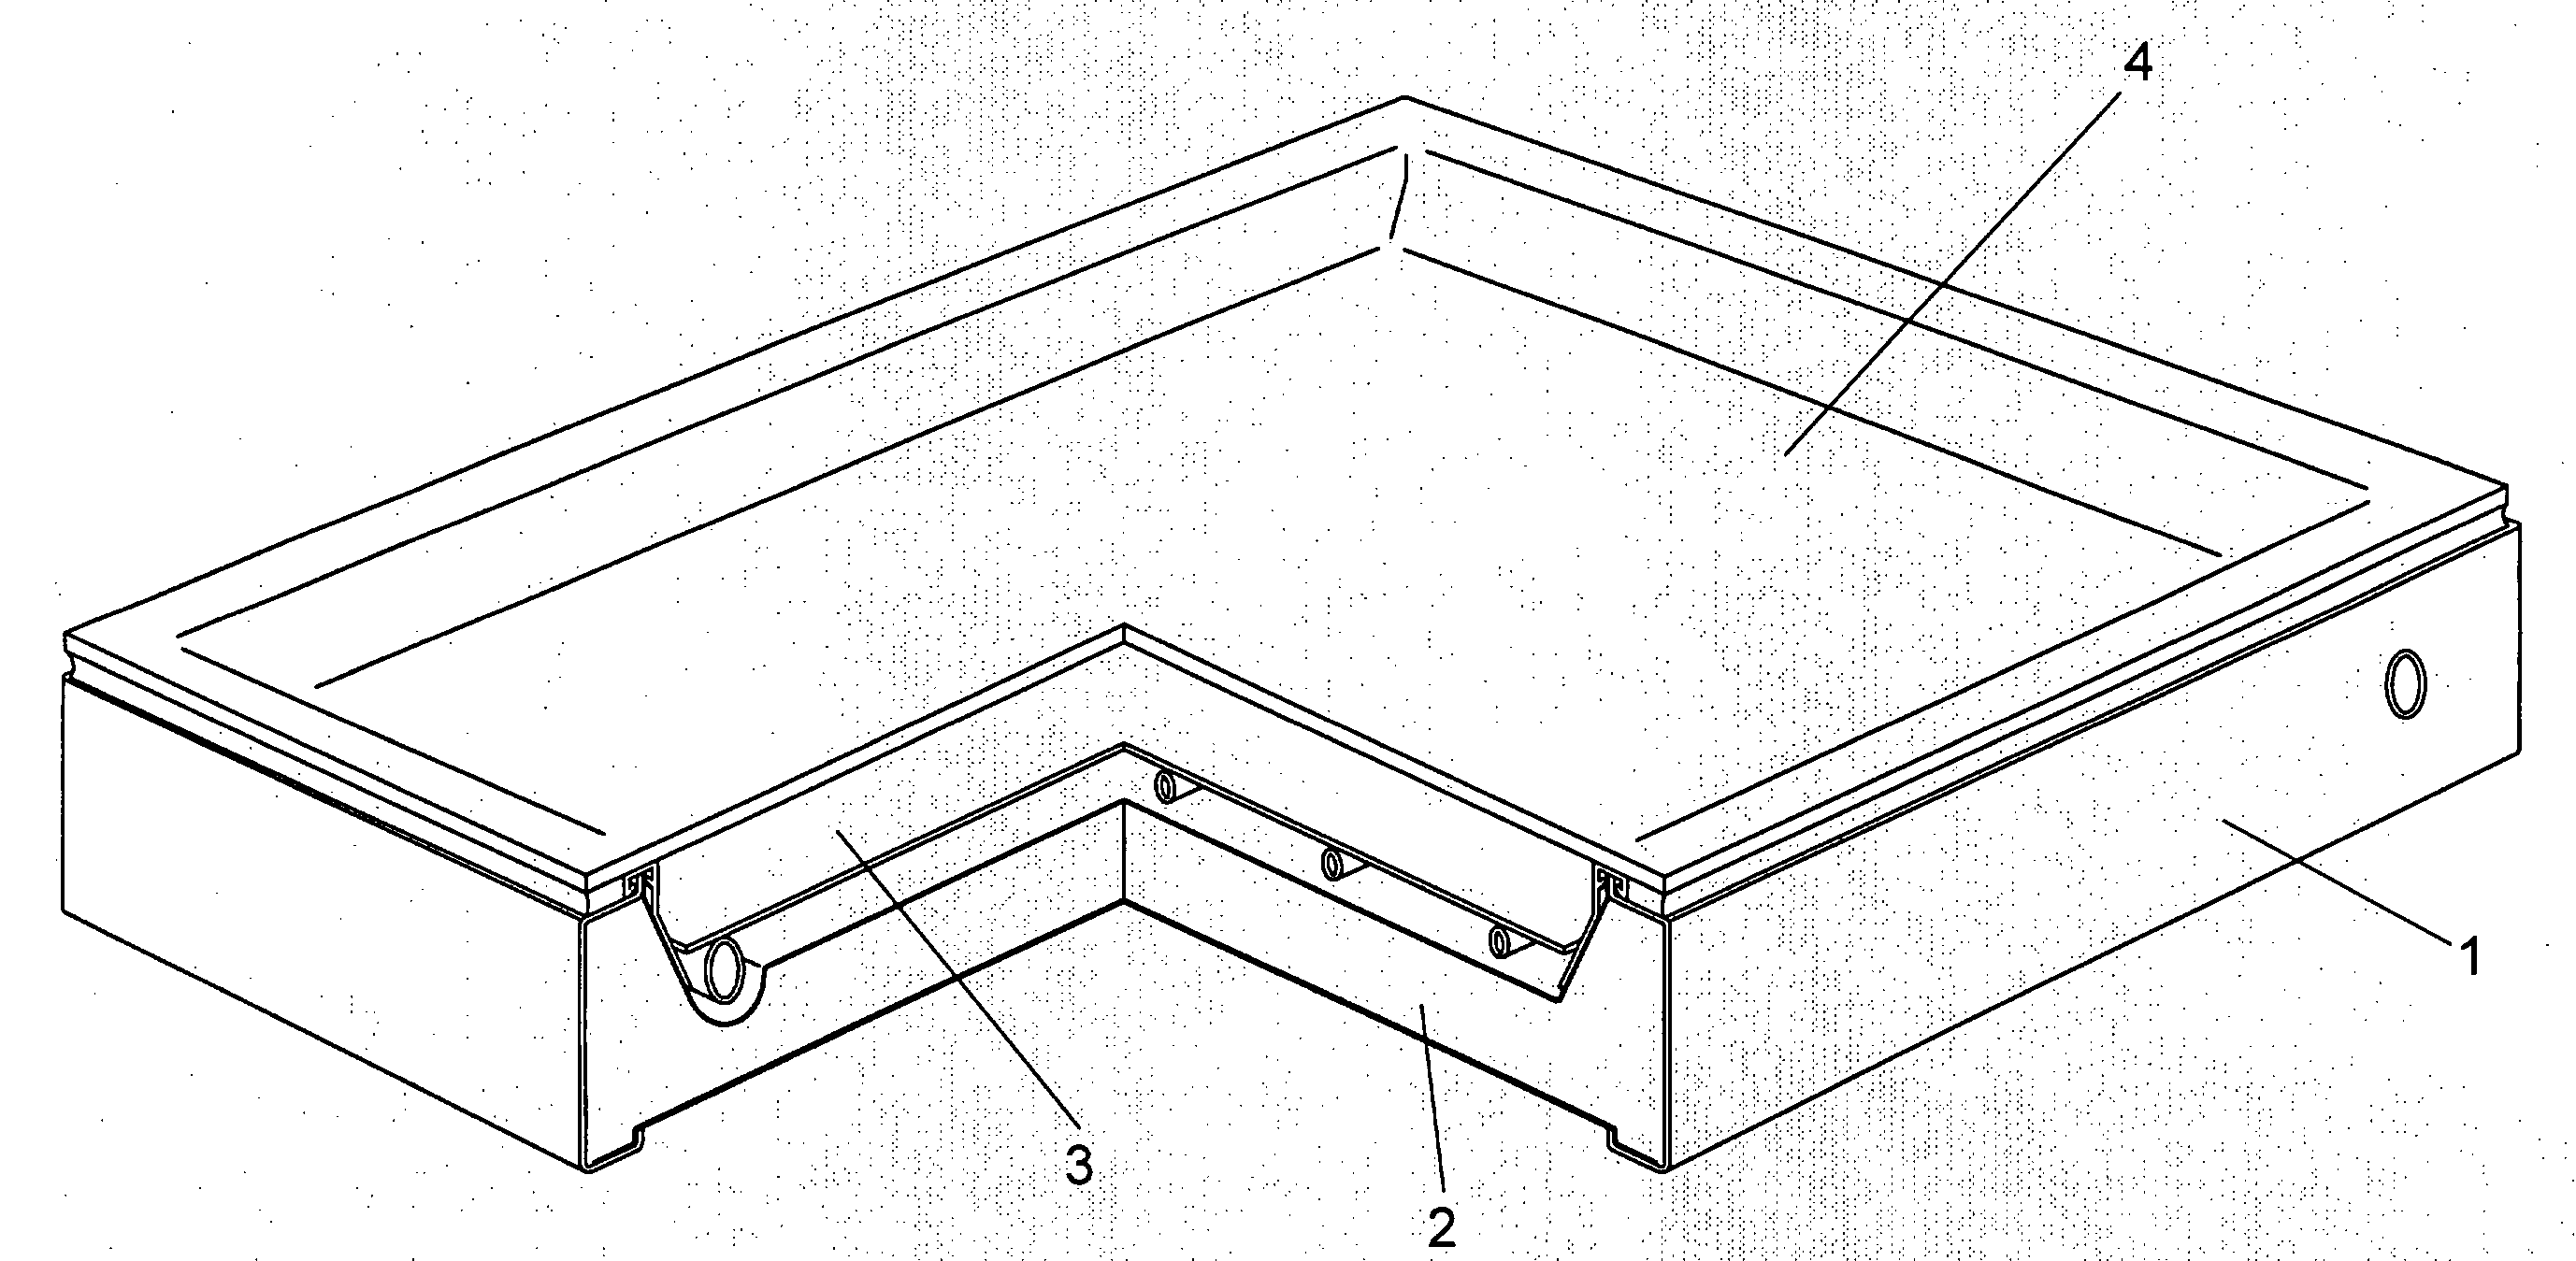 Solar Collector and Mounting Bracket